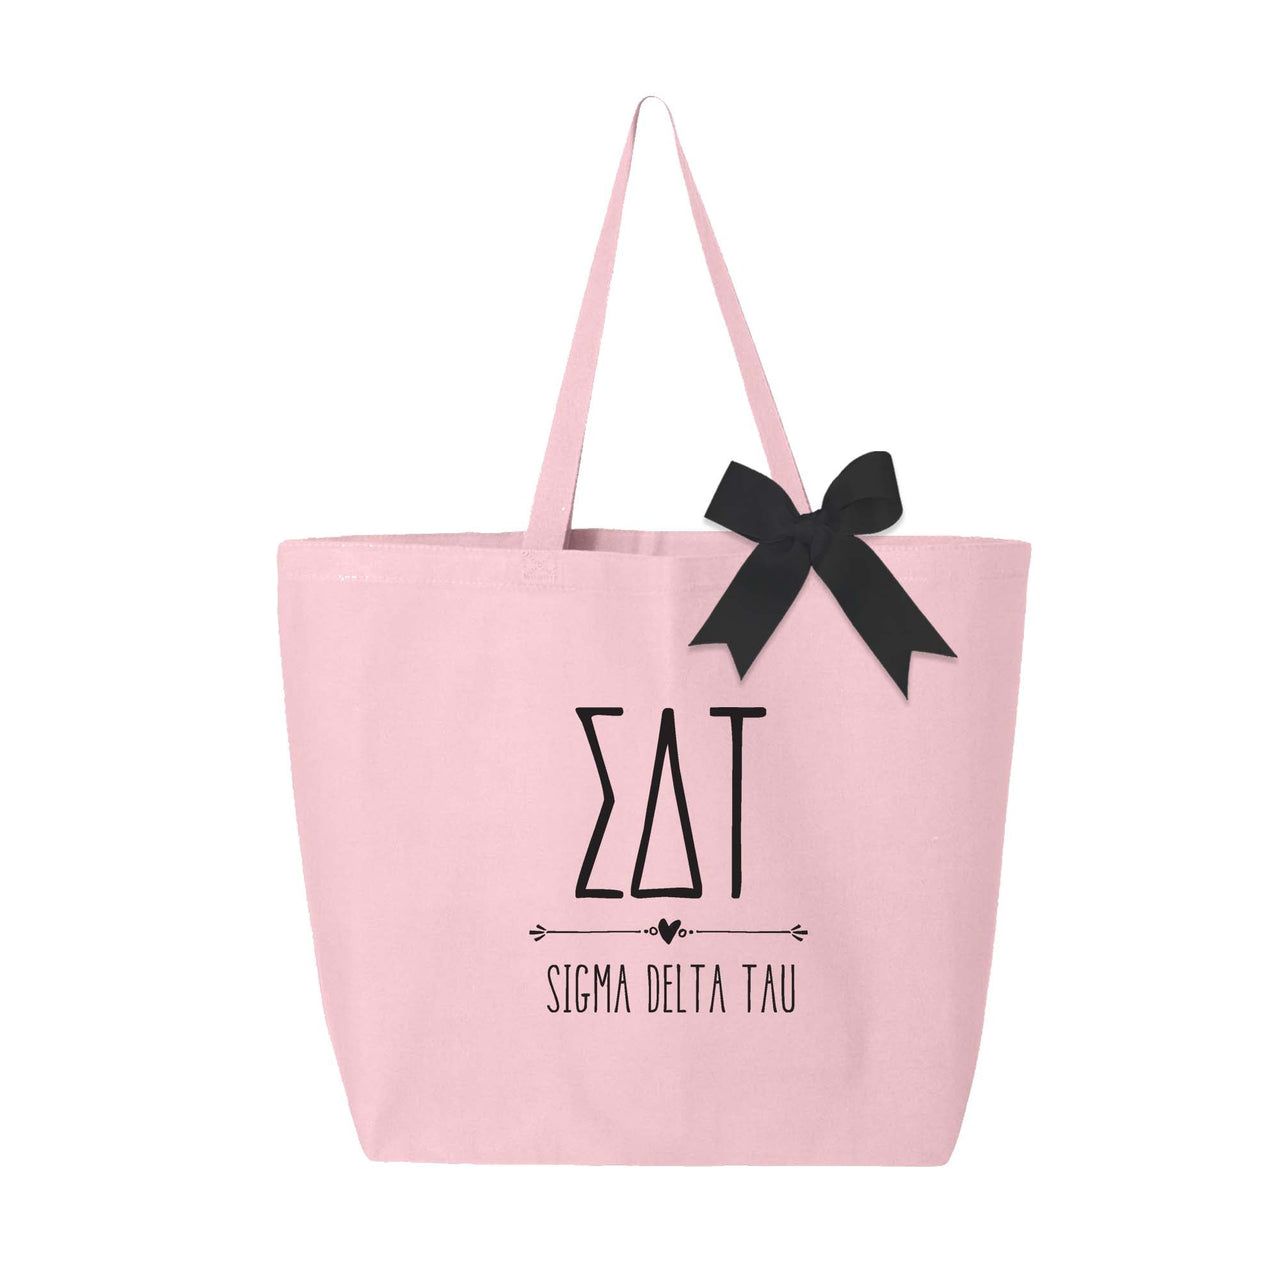 Sigma Delta Tau sorority name custom printed on pink canvas tote bag with black bow